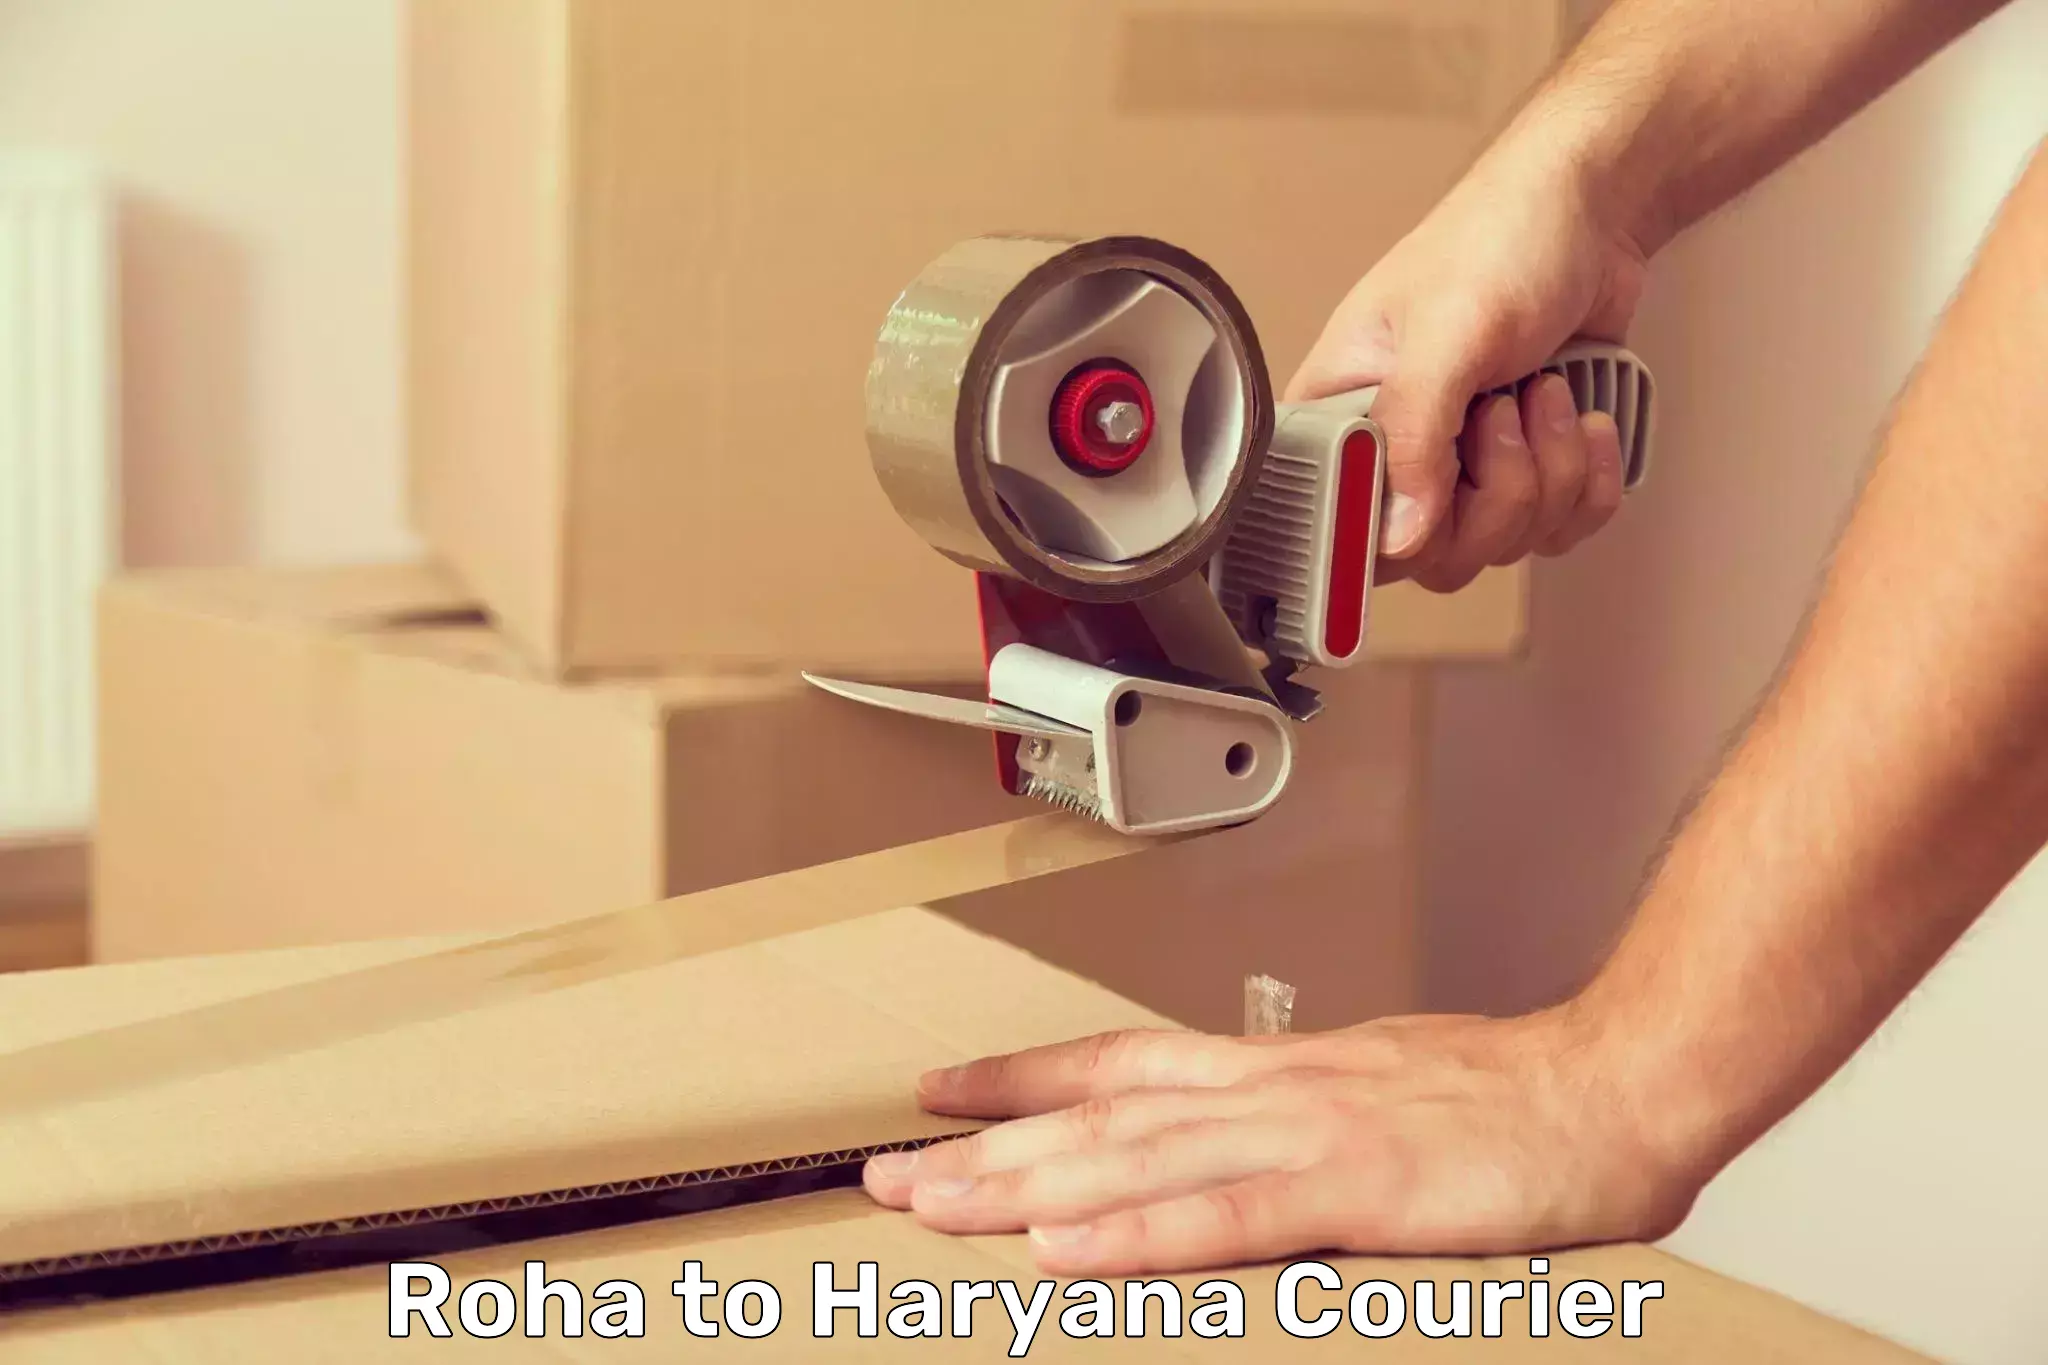 Global freight services Roha to NCR Haryana